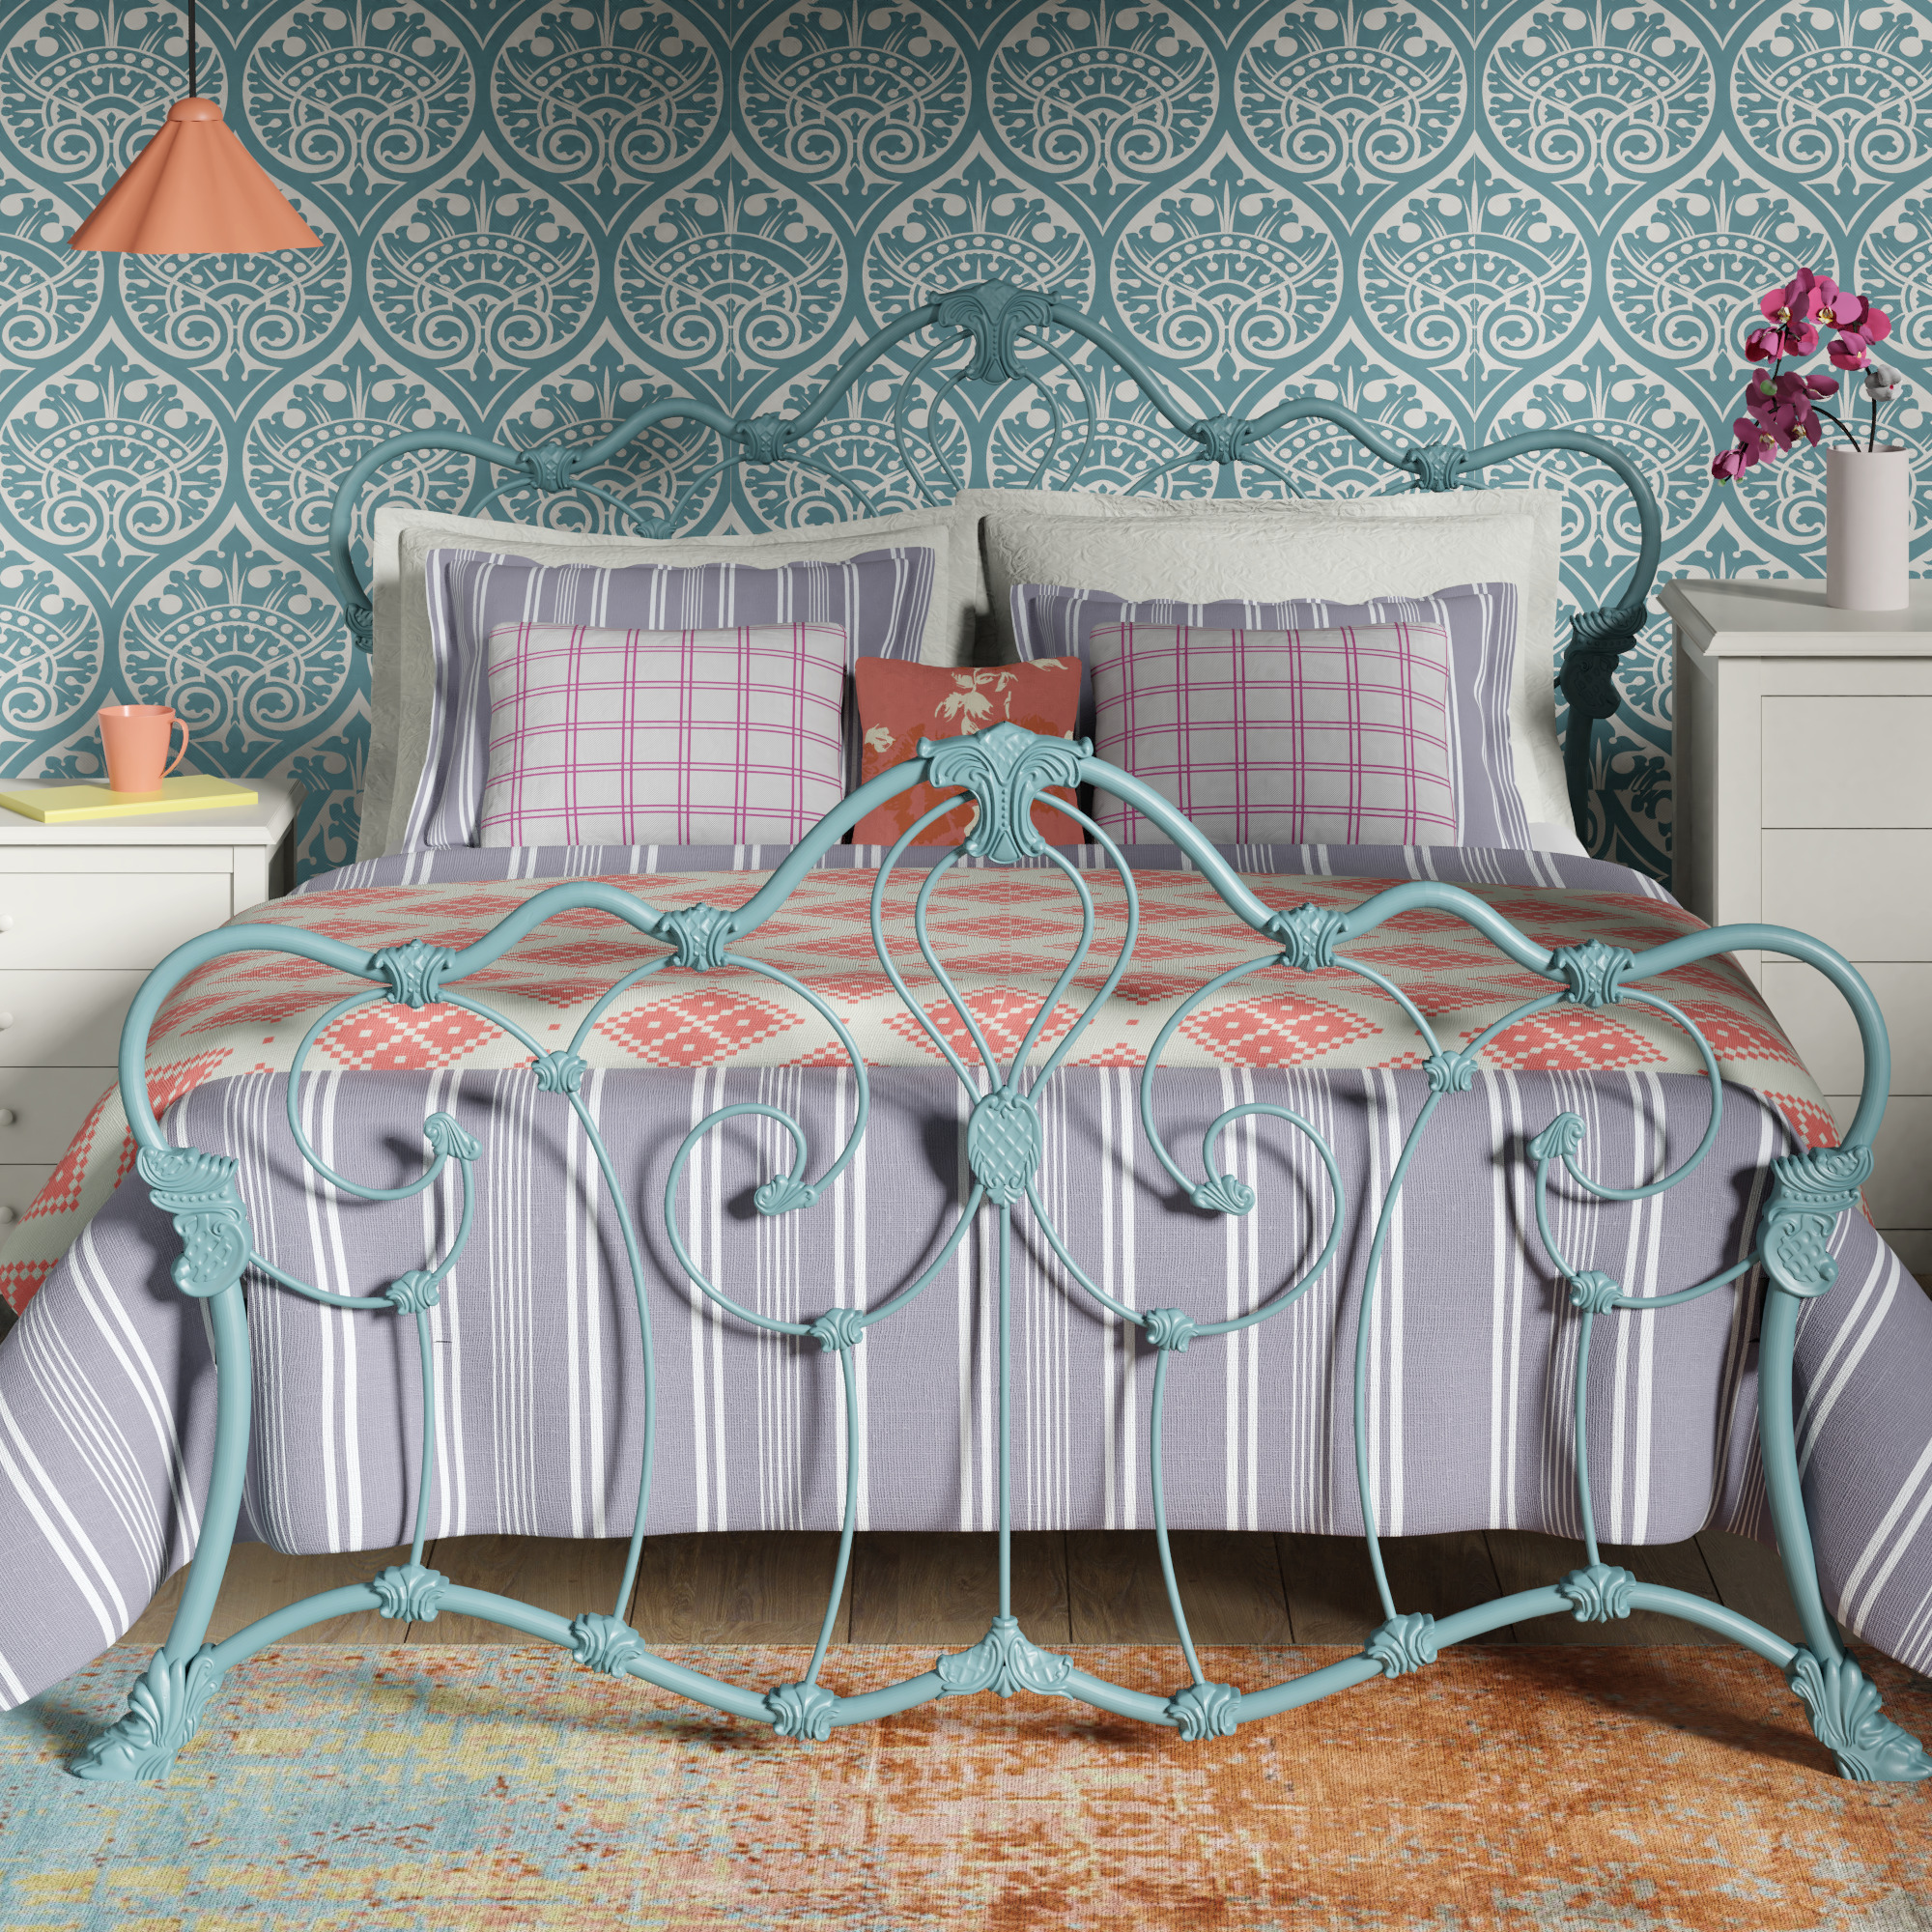 Athalone iron bed frame - Image teal